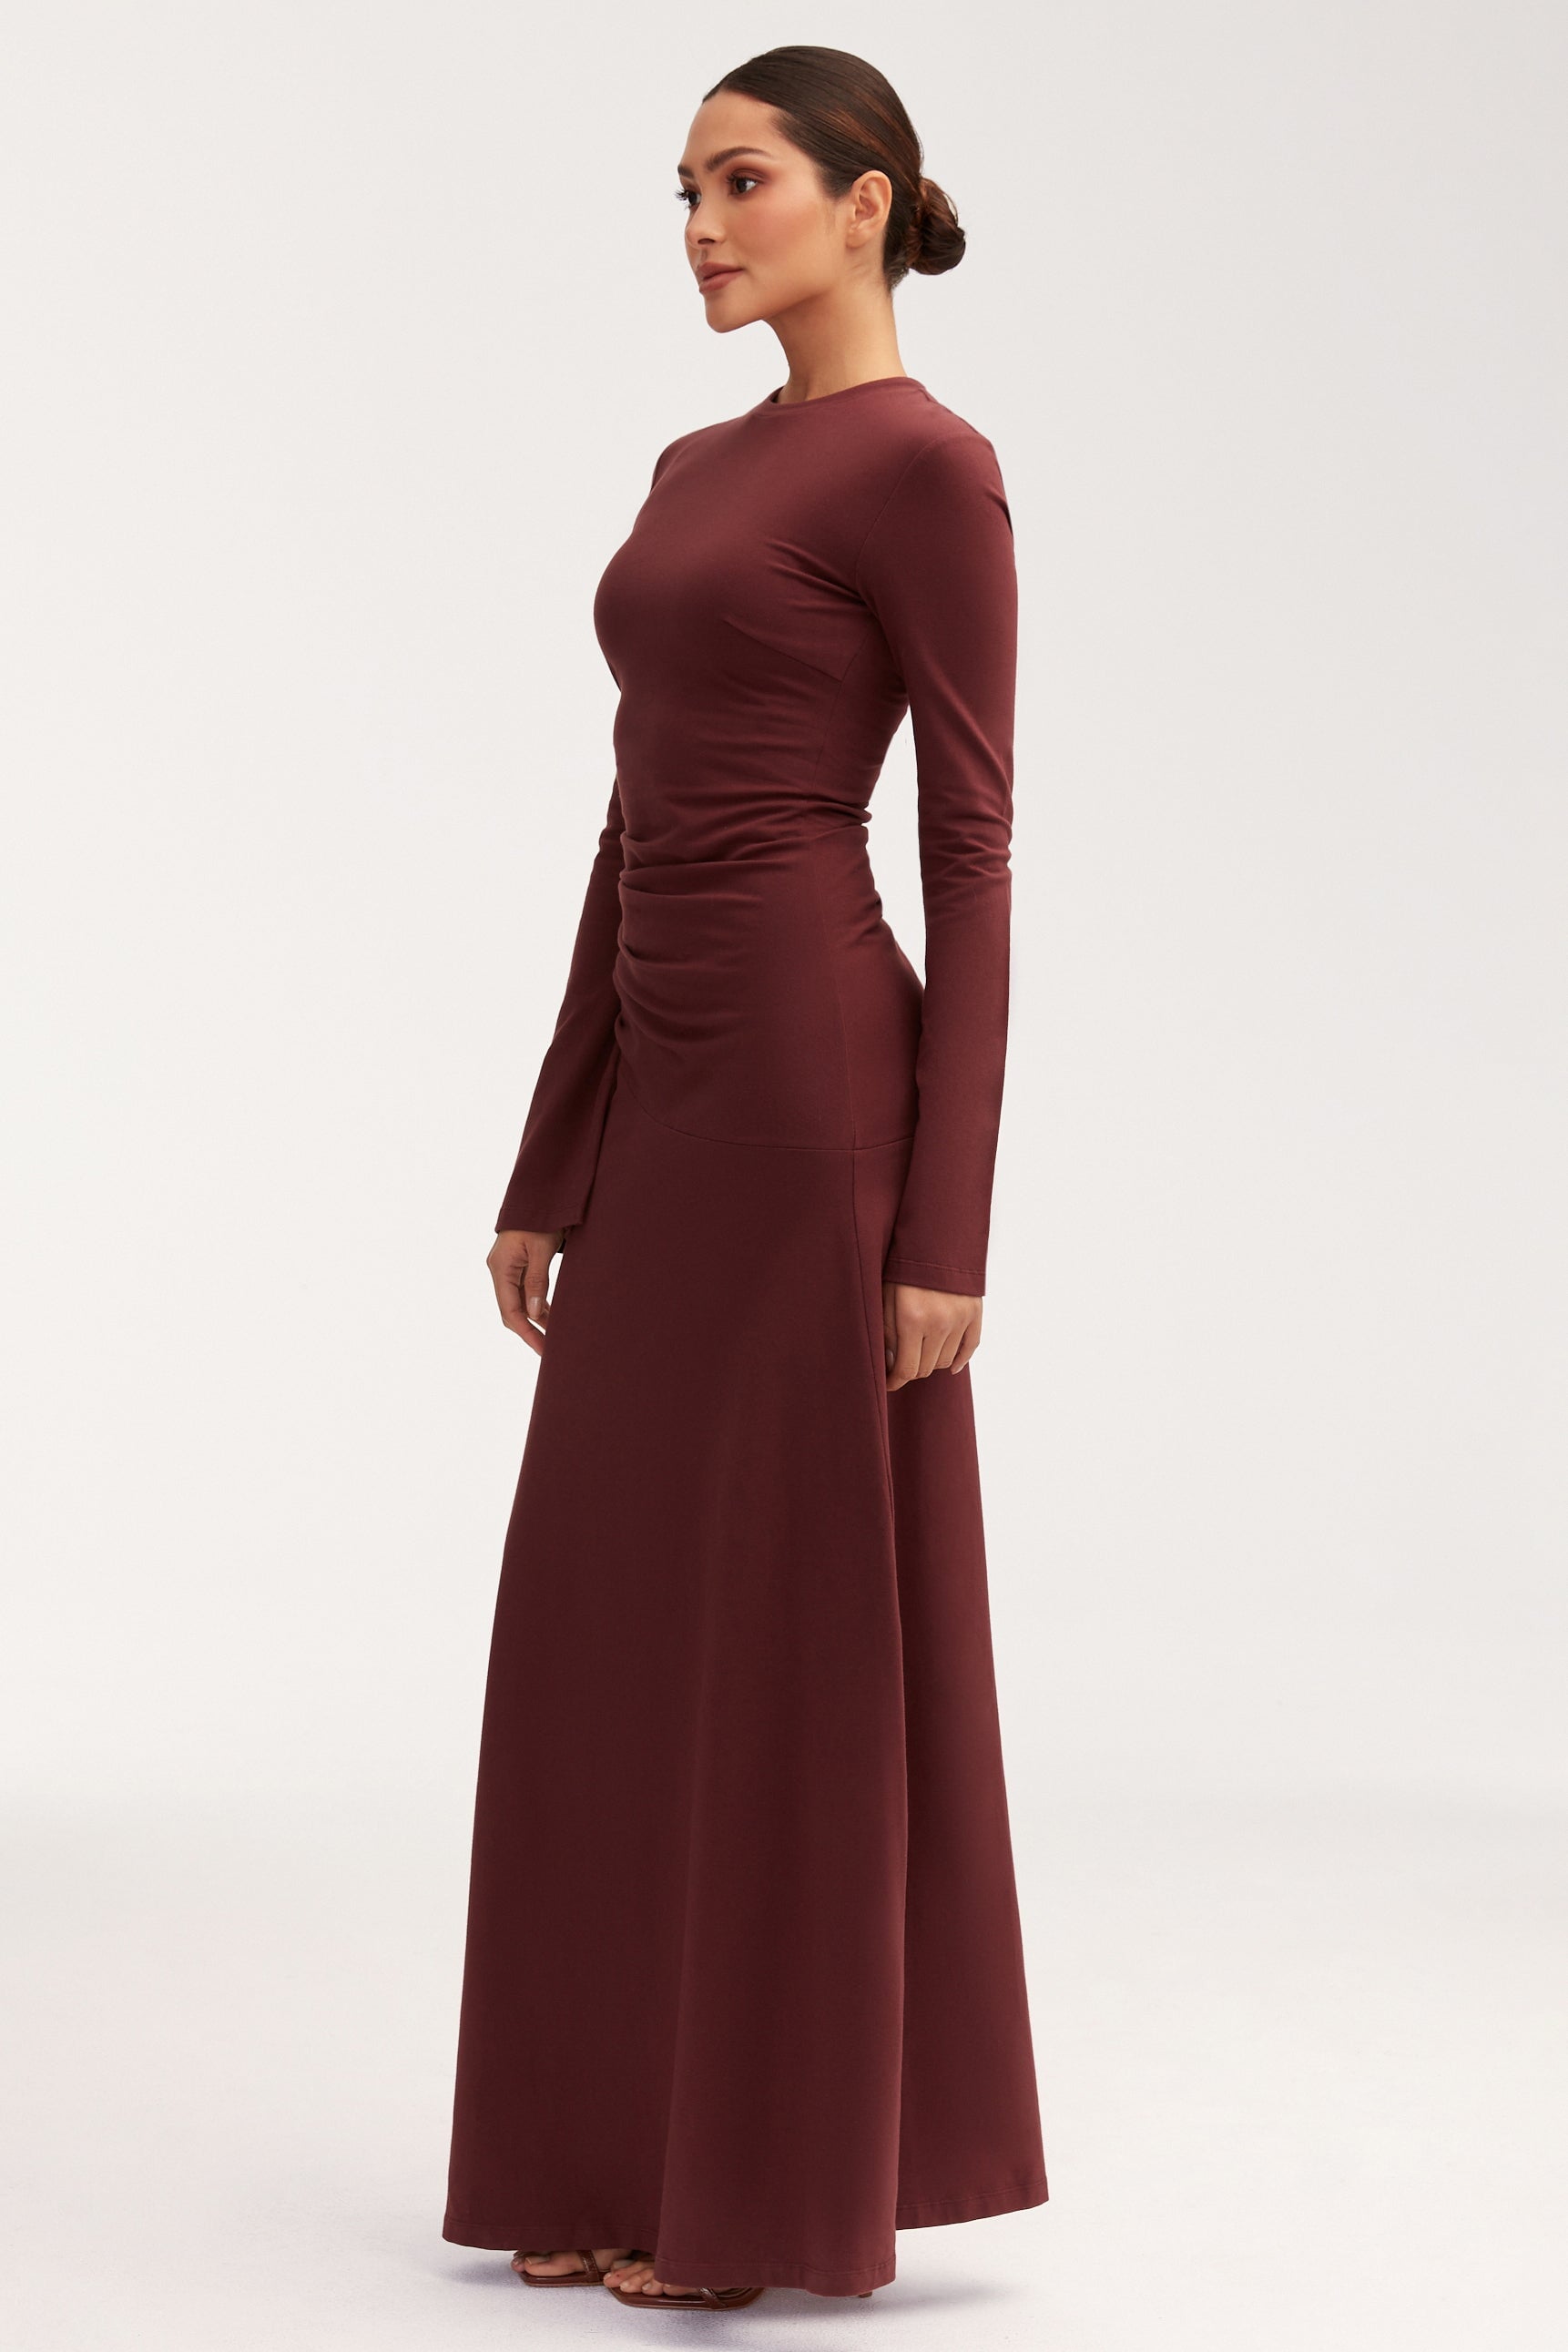 Natalie Rouched Jersey Maxi Dress - Port Royale Dresses Veiled 